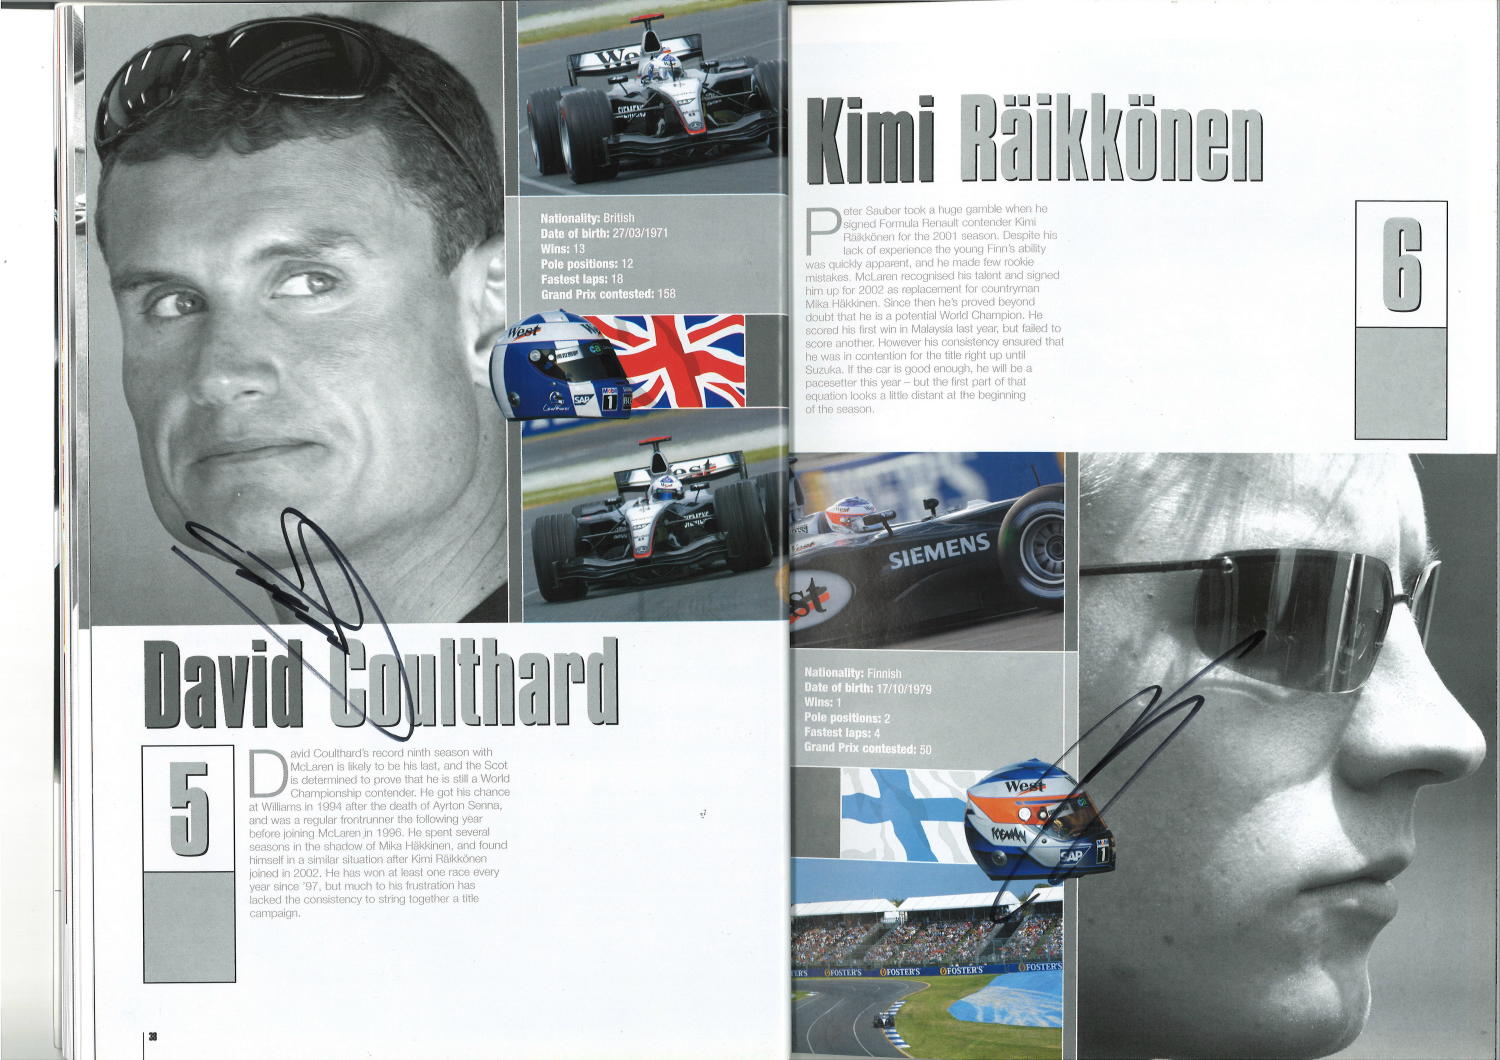 Multi signed Malaysian Grand Prix 2004 programme. Signed by 16 including Michael Schumacher, - Image 4 of 7